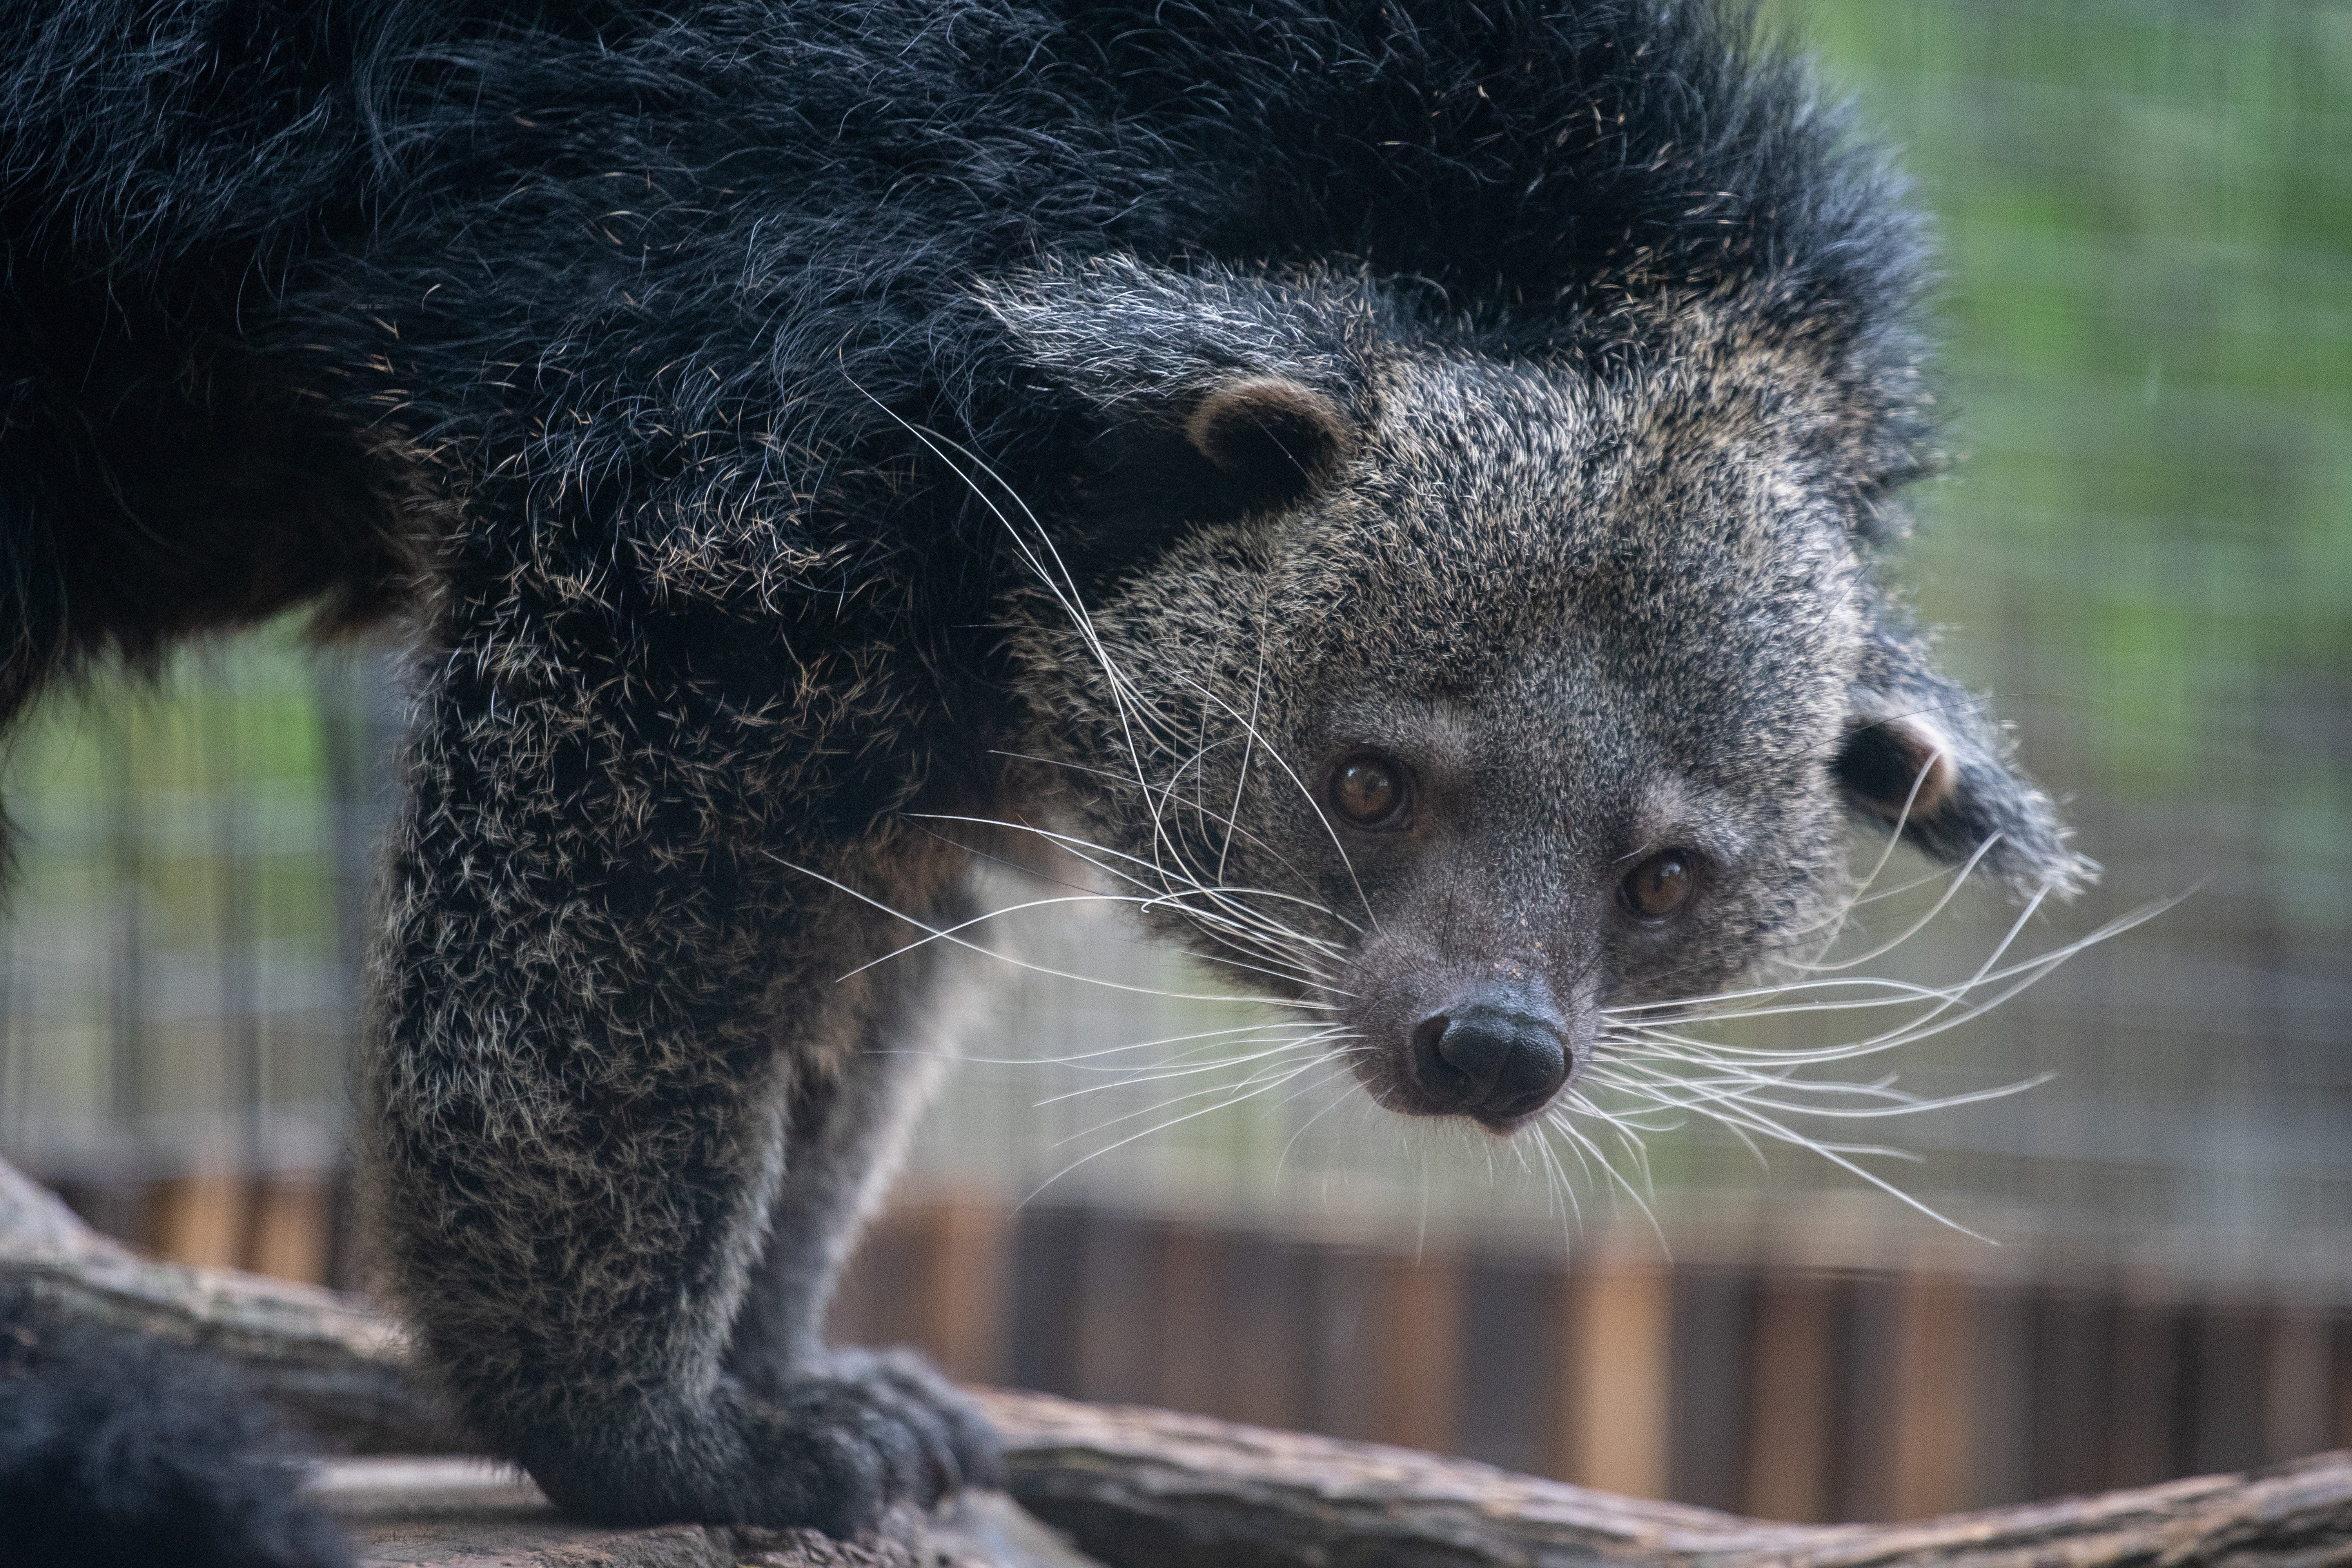 A binturong stands on the left side of the image. It's head is facing downward and toward the camera. Only it's two front paws are pictured, and a small piece of its tail appears in the bottom left corner. 